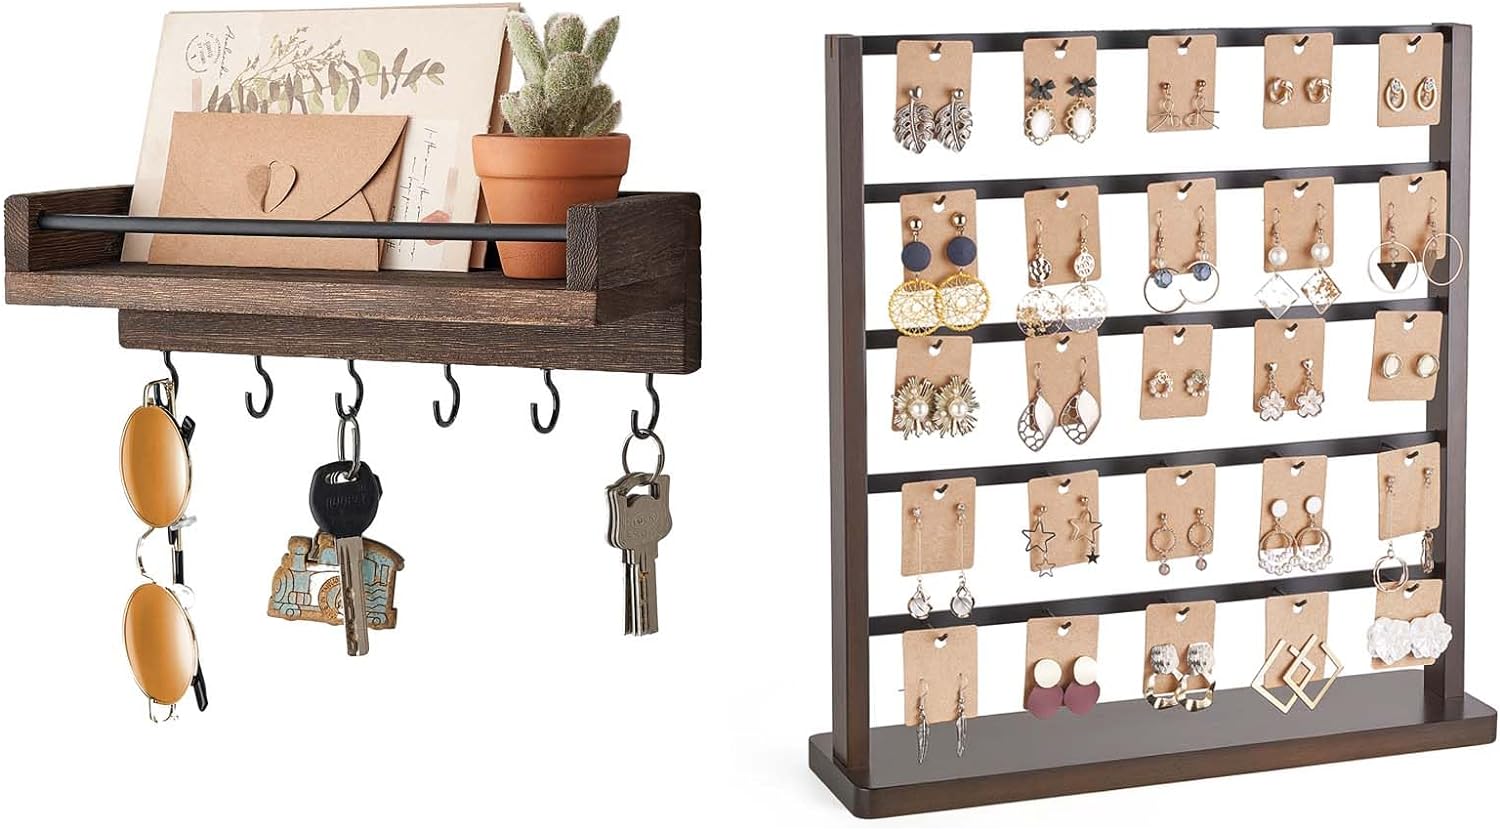 Mkono Key Holder for Wall Small Key Rack Decorative Display Keys Hanger and Earring Display Stands Wooden Earring Holder Organizer with 25 Hooks Earring Organizer 5 Layer Jewelry Display